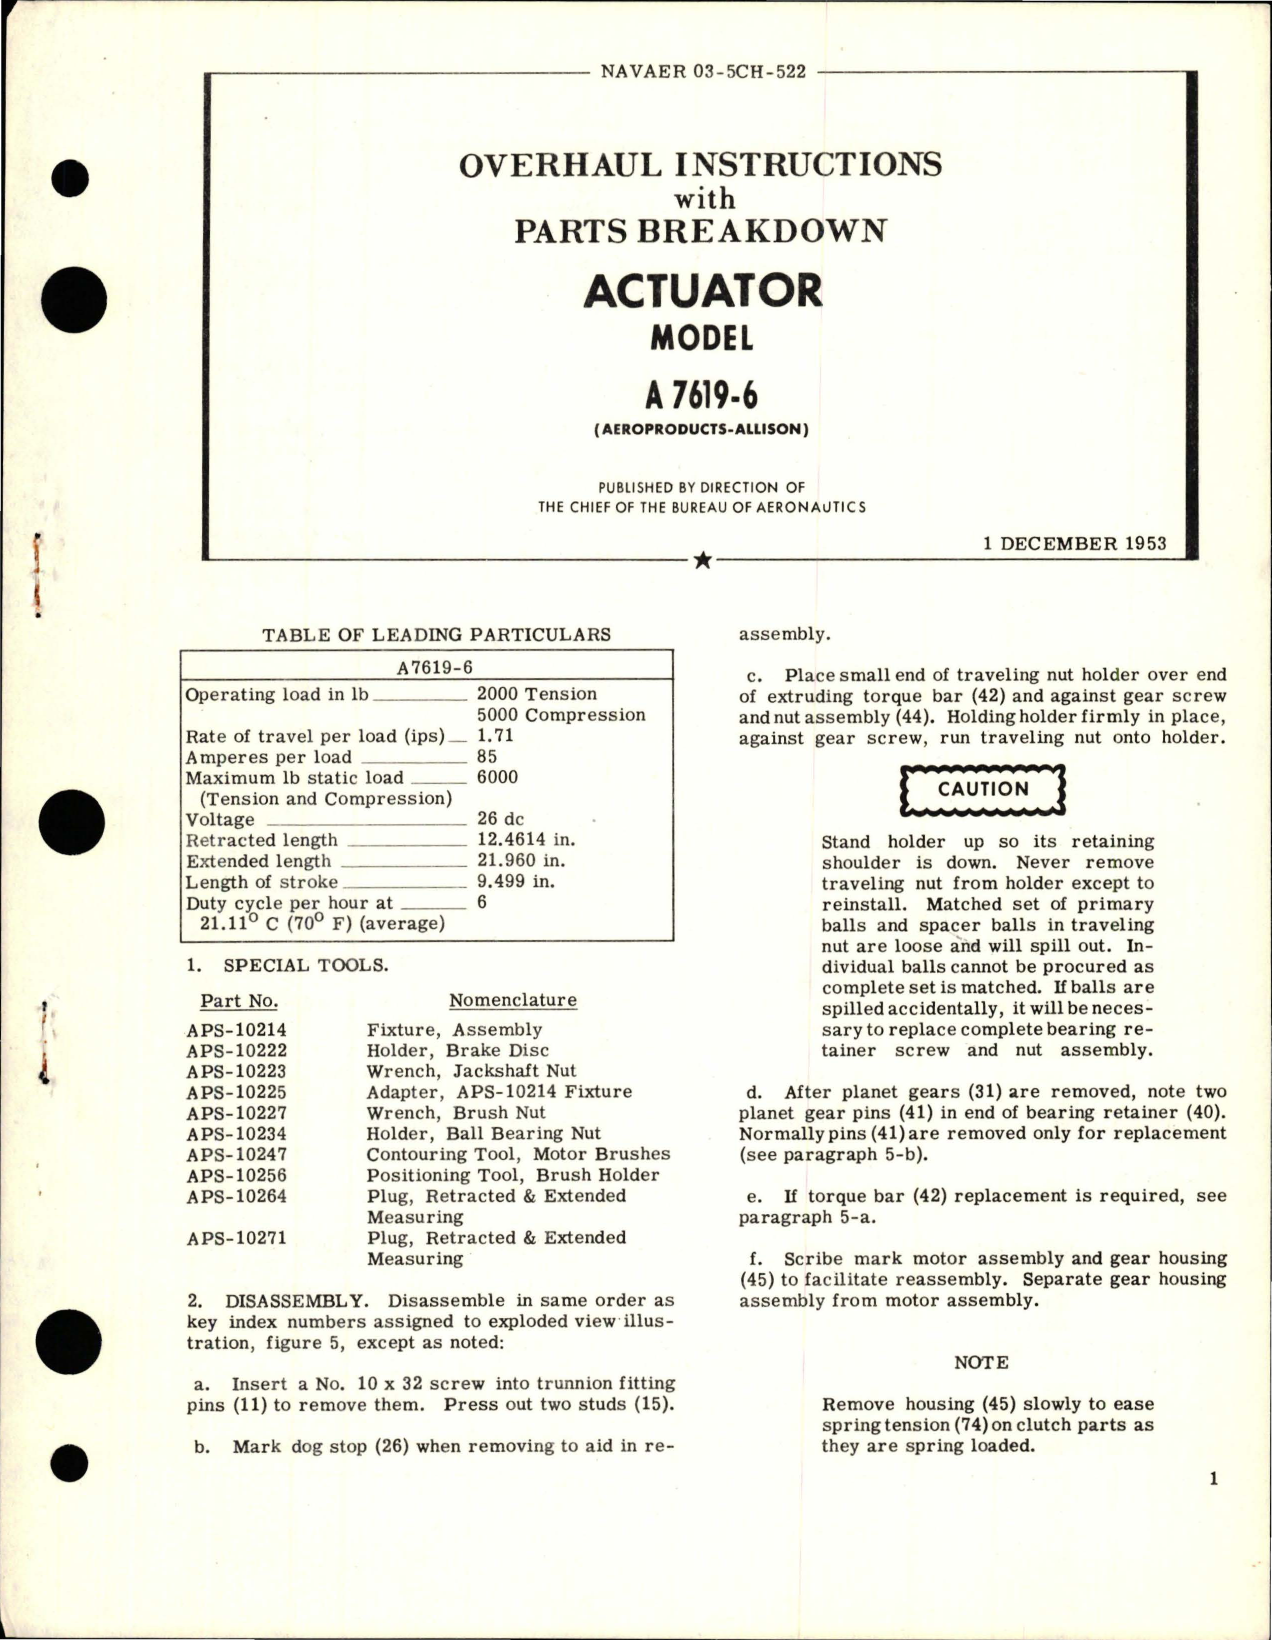 Sample page 1 from AirCorps Library document: Overhaul Instructions with Parts Breakdown for Actuator - Model A 7619-6